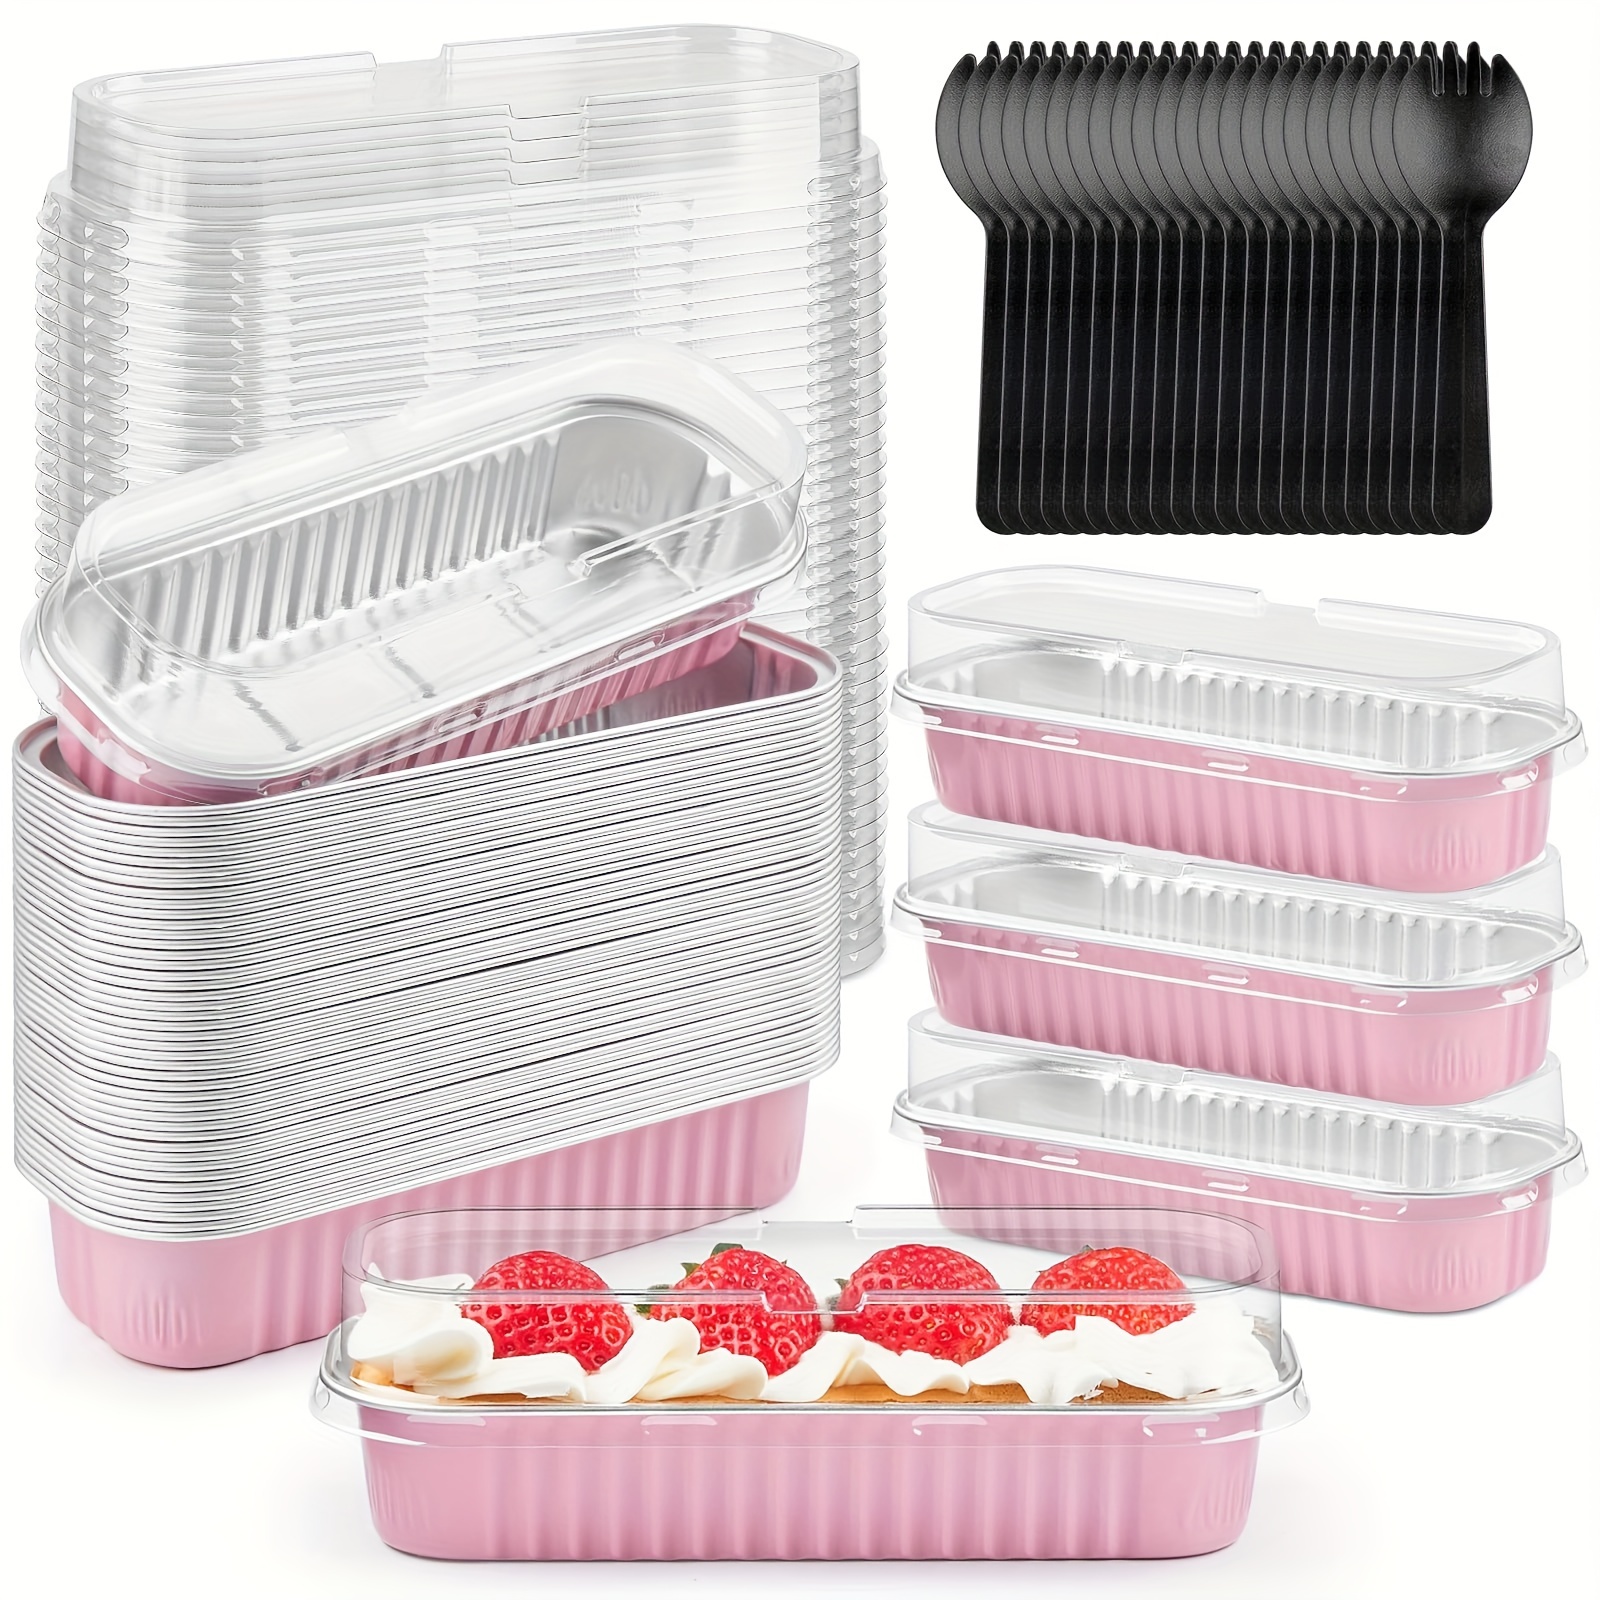 

50-pack Mini Loaf Pans With Lids & Spoons, 6.8oz Disposable Aluminum Baking Cups - Sturdy & Stackable Foil Tins For Cakes, Cupcakes, Creme Brulee, Cheesecake Ramekins